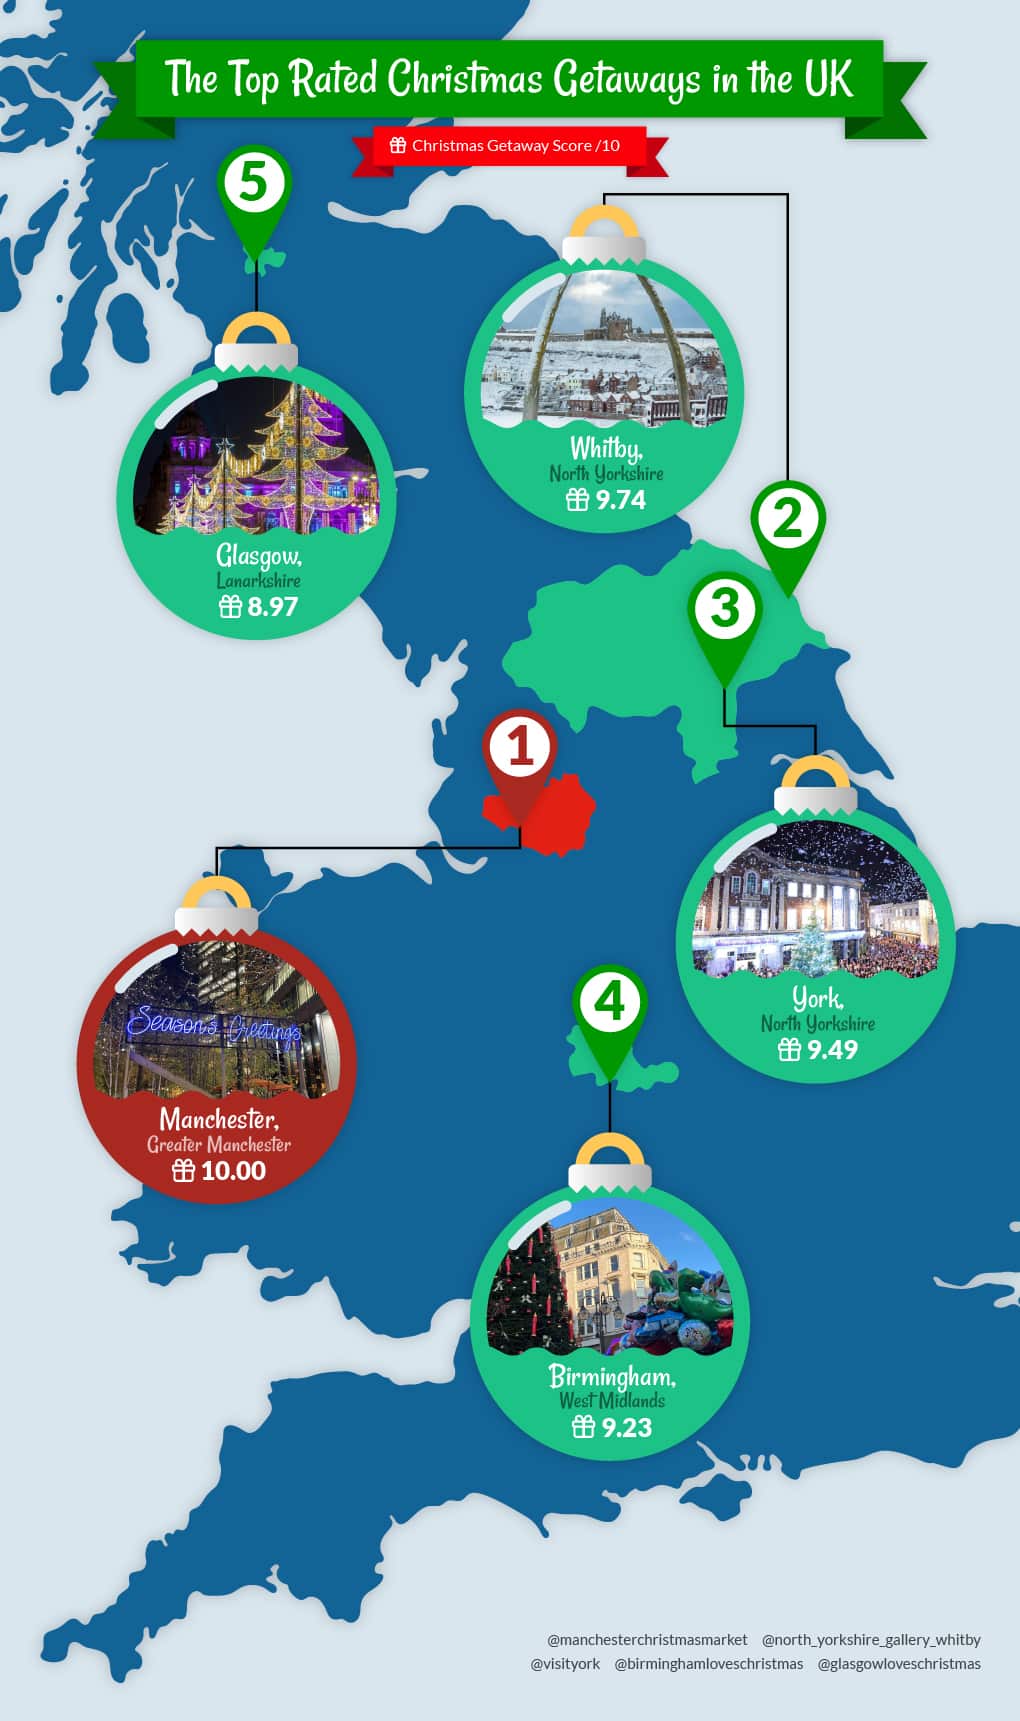 map-of-uk-with-best-cities-for-a-festive-getaway-including-manchester